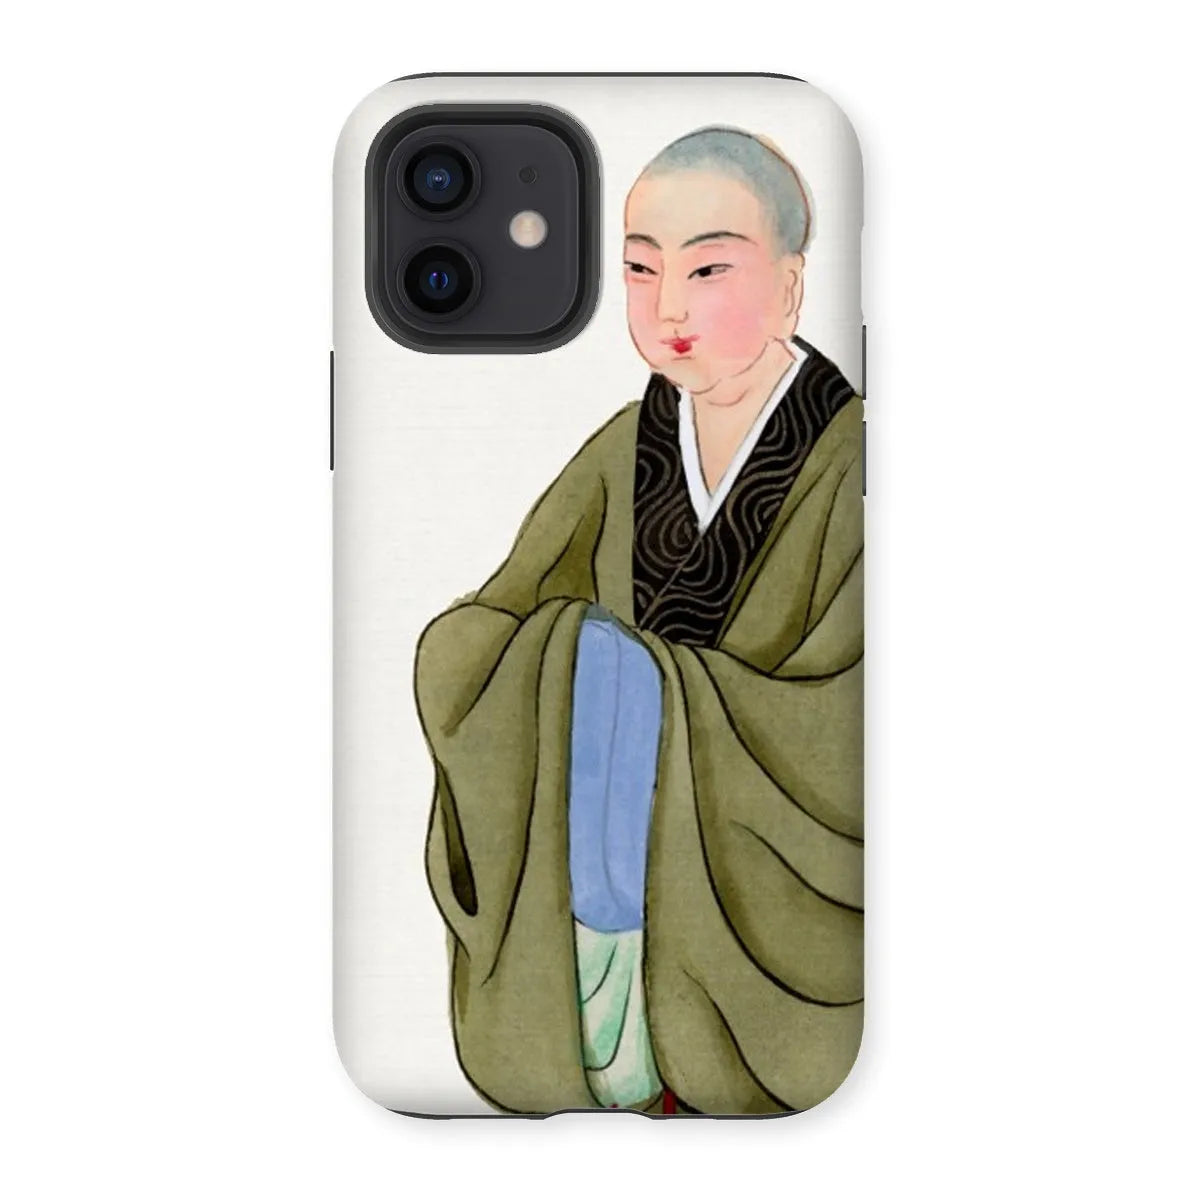 Buddhist Monk - Manchu Chinese Aesthetic Art Phone Case - Iphone 12 / Matte - Mobile Phone Cases - Aesthetic Art